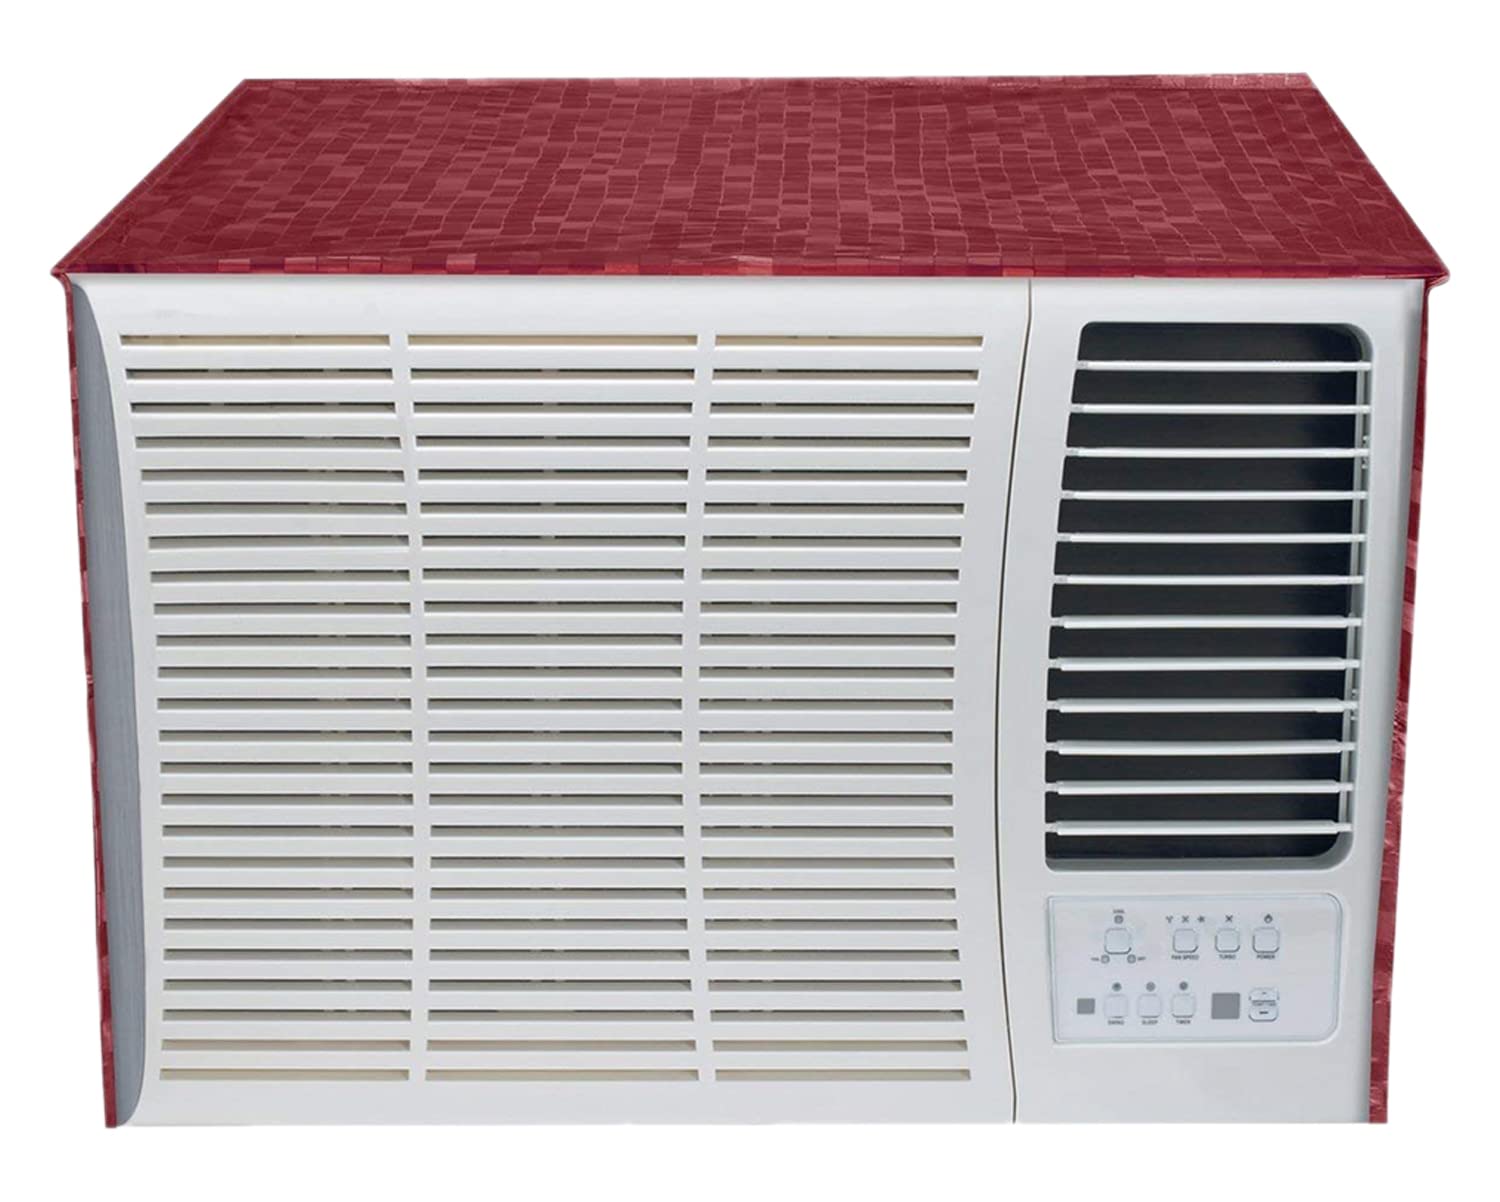 Kuber Industries 3D Design PVC Window AC Cover for 2 Ton Capacity - Maroon (CTKTC01716), Standard